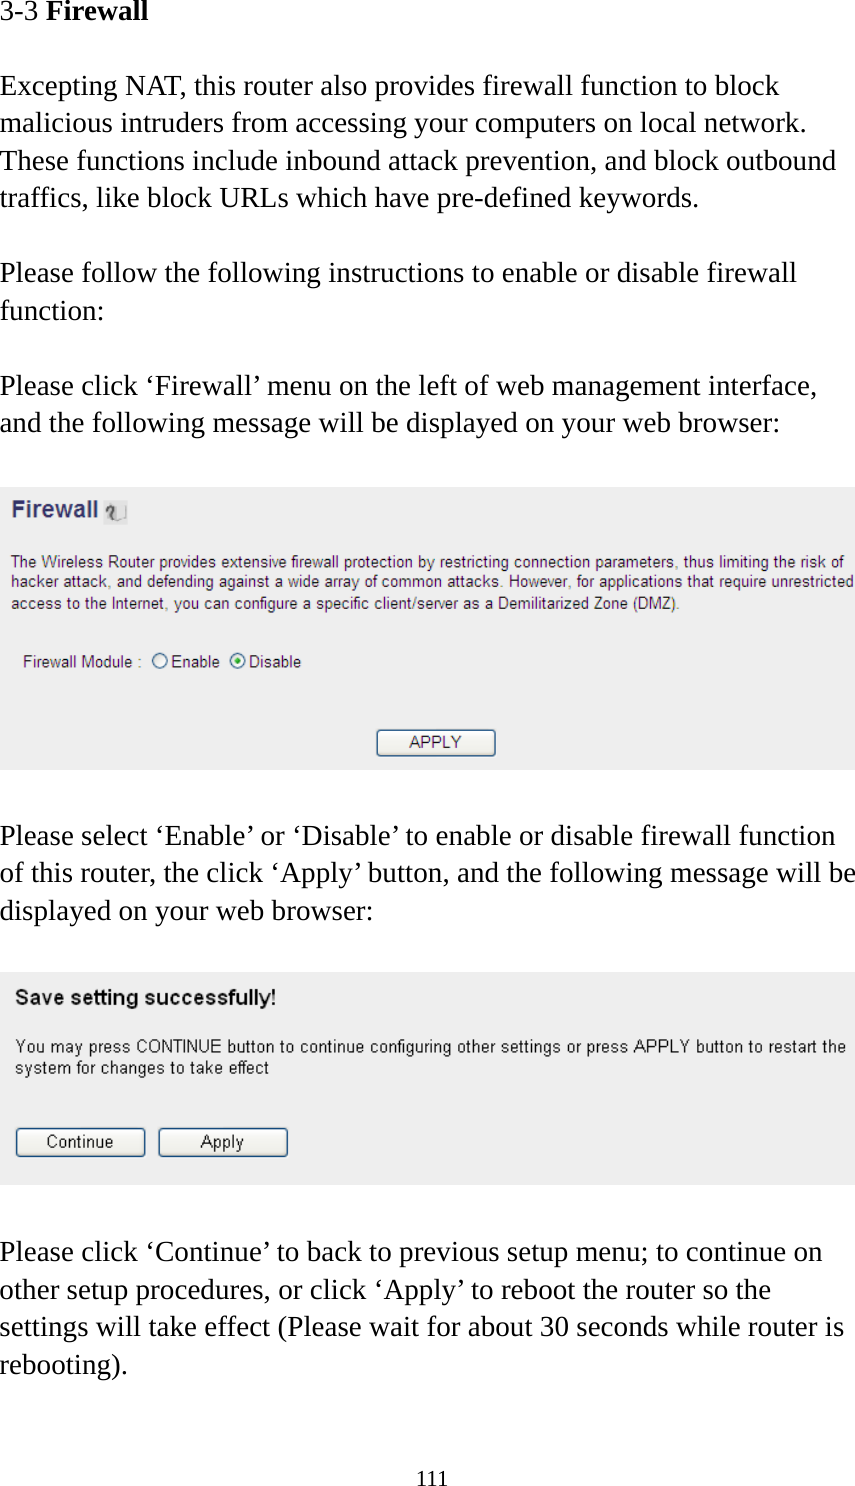 111 3-3 Firewall  Excepting NAT, this router also provides firewall function to block malicious intruders from accessing your computers on local network. These functions include inbound attack prevention, and block outbound traffics, like block URLs which have pre-defined keywords.  Please follow the following instructions to enable or disable firewall function:  Please click ‘Firewall’ menu on the left of web management interface, and the following message will be displayed on your web browser:    Please select ‘Enable’ or ‘Disable’ to enable or disable firewall function of this router, the click ‘Apply’ button, and the following message will be displayed on your web browser:    Please click ‘Continue’ to back to previous setup menu; to continue on other setup procedures, or click ‘Apply’ to reboot the router so the settings will take effect (Please wait for about 30 seconds while router is rebooting).  